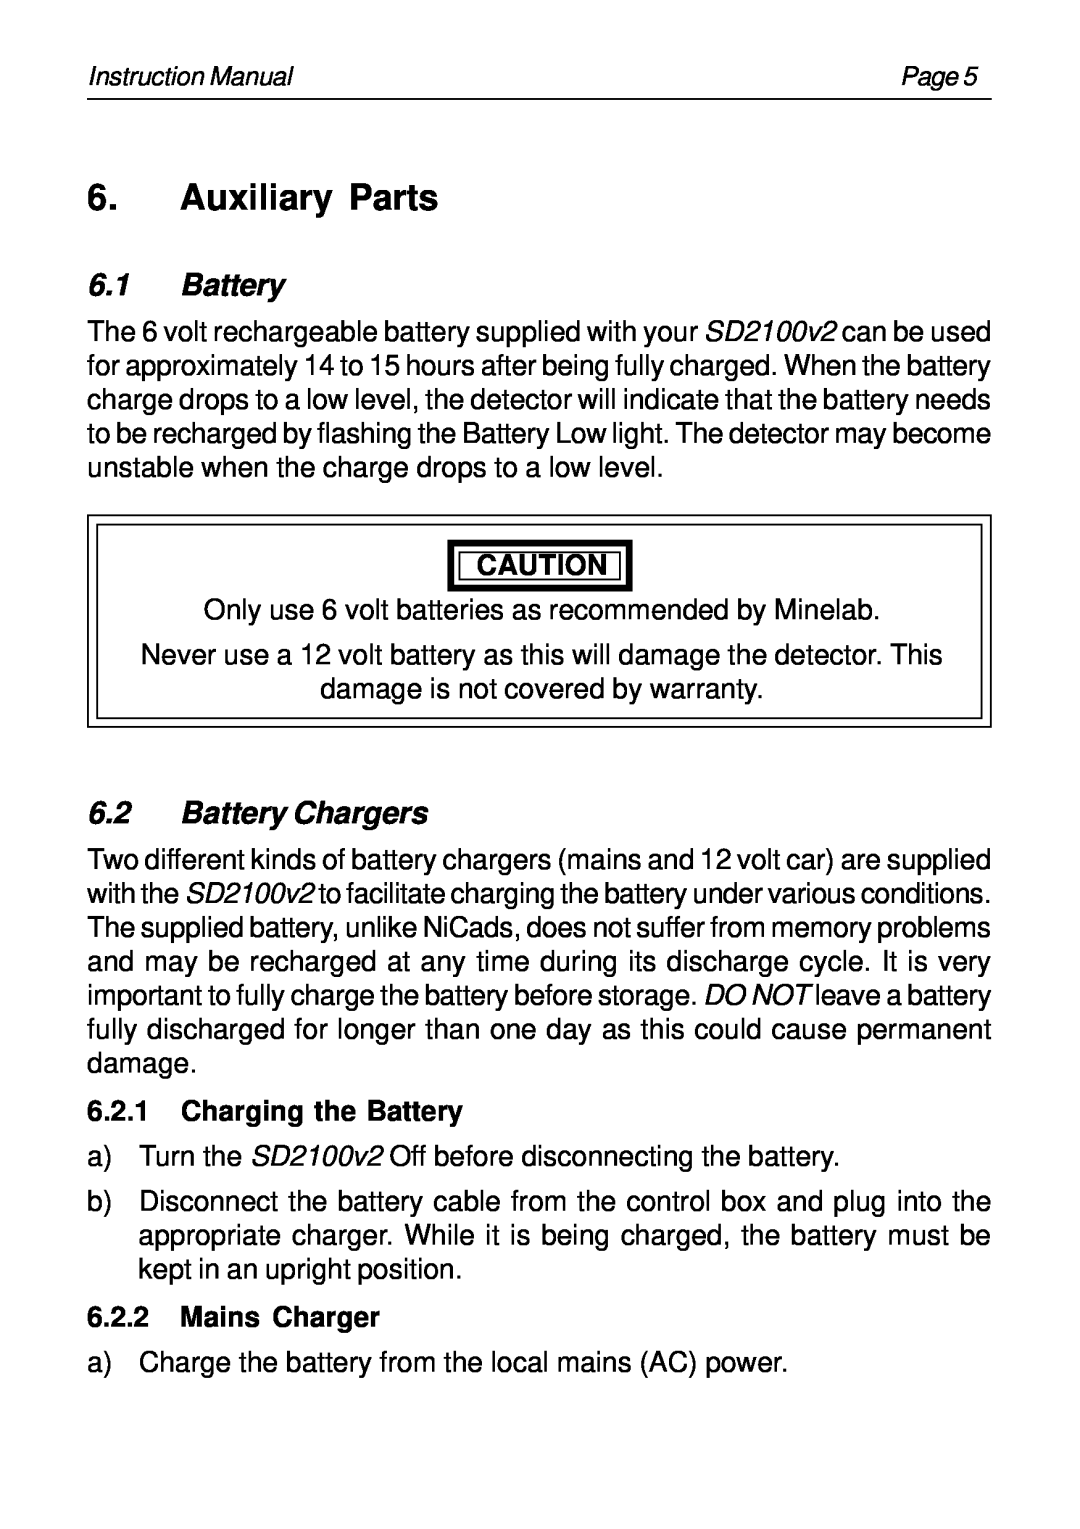 Minelab SD2100v2 instruction manual Auxiliary Parts, Battery Chargers, Charging the Battery, Mains Charger 